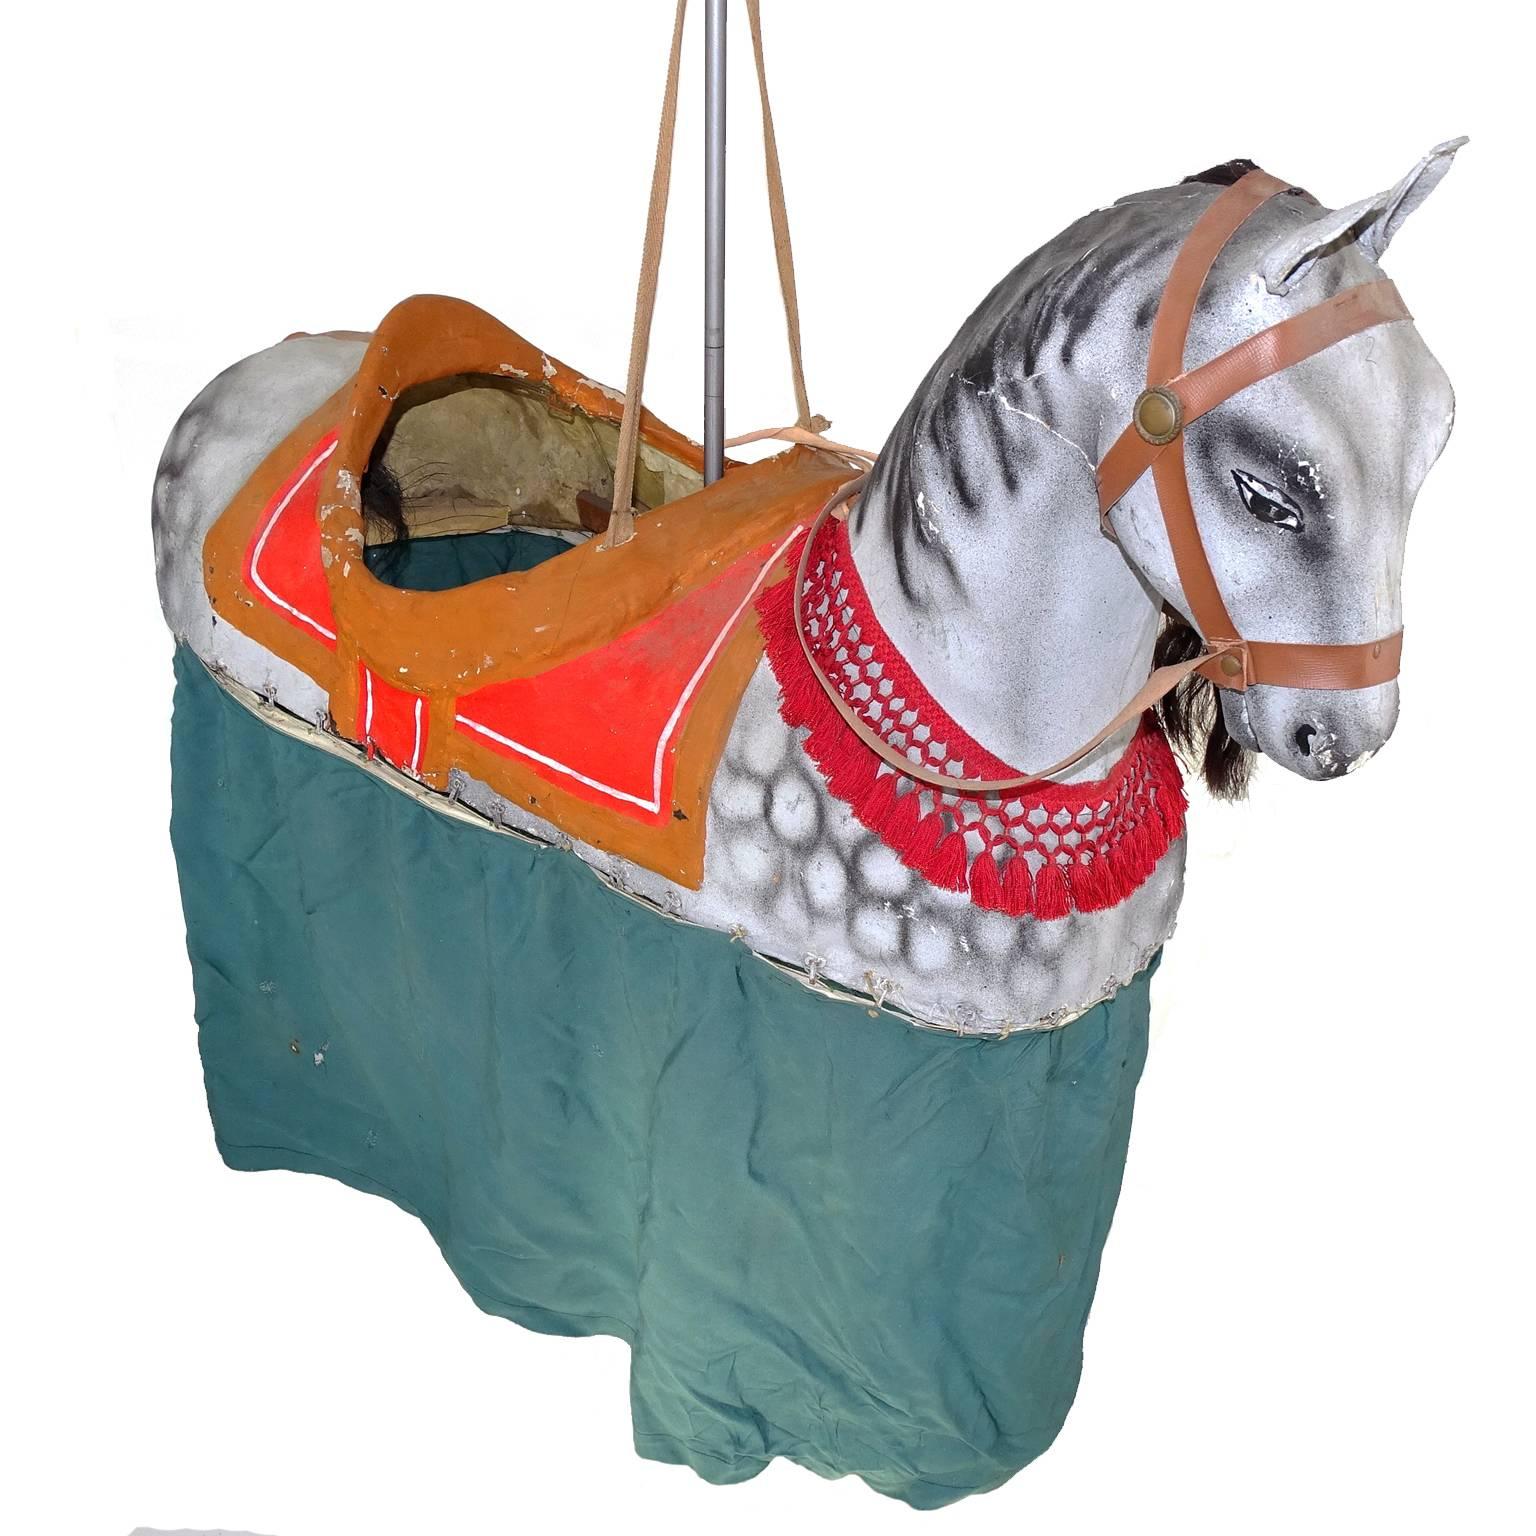 A beautiful French paper mach horse carnival costume from circa 1890.
it's a hand-painted paper mache horse 